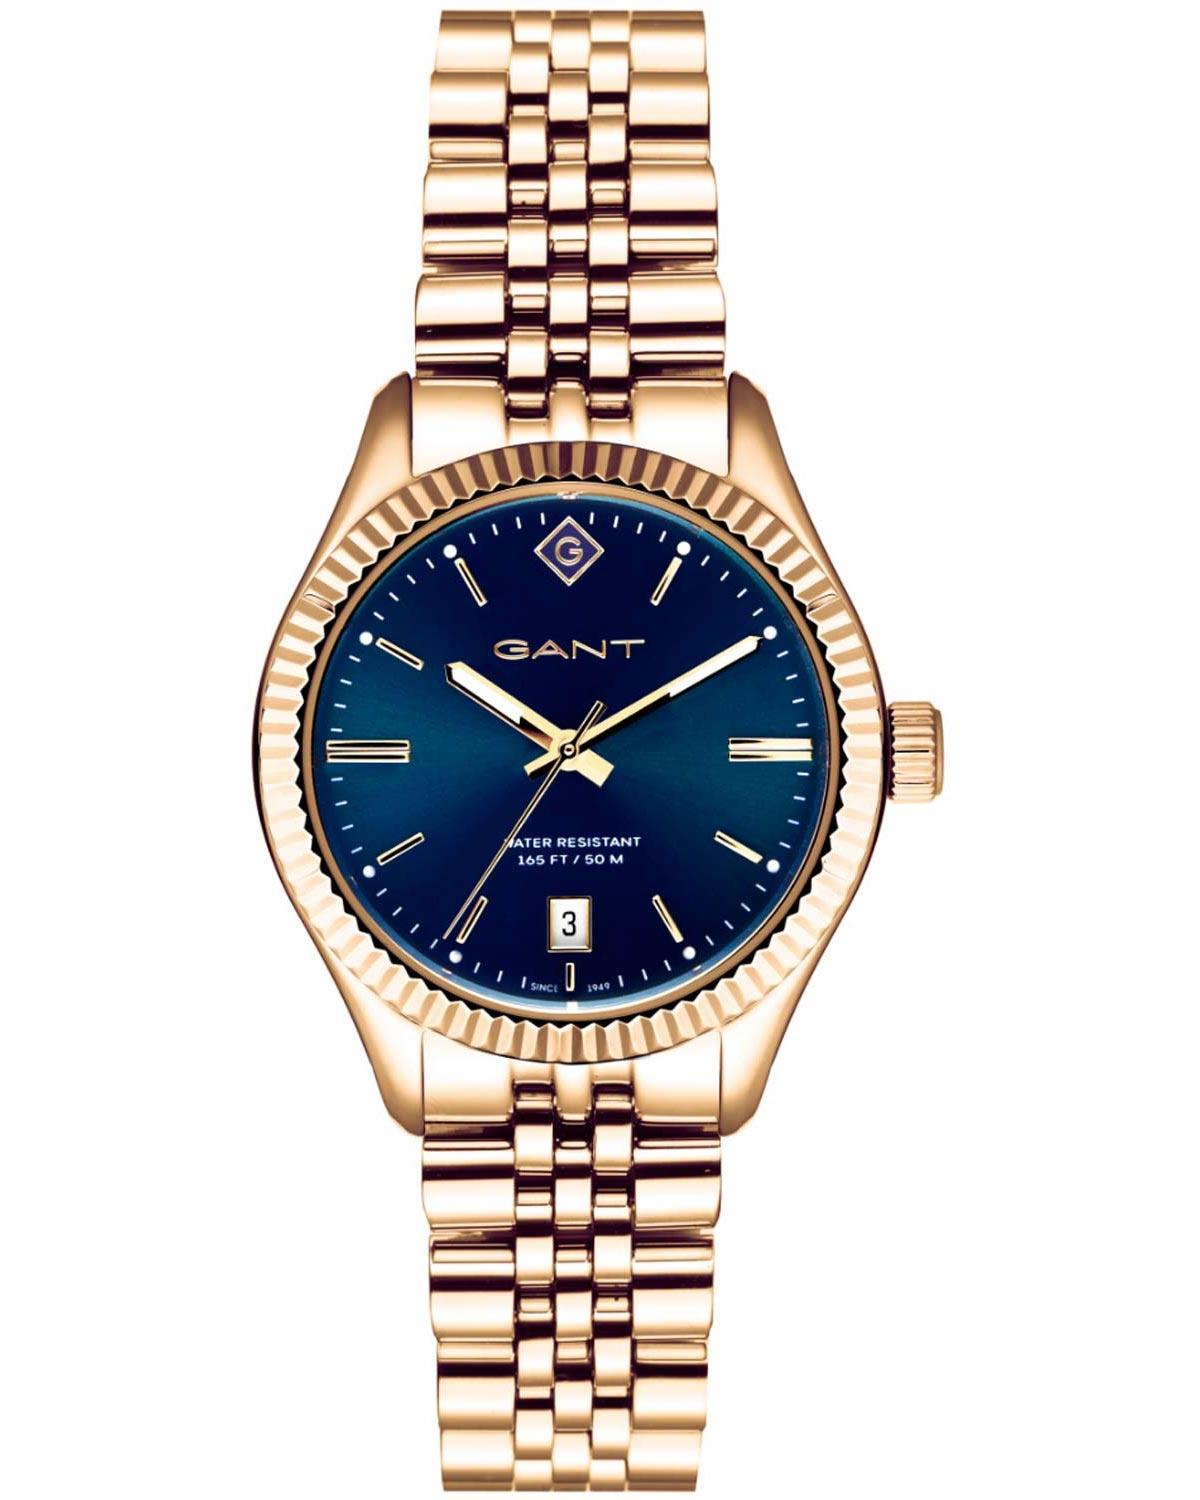 GANT Sussex Ladies - G136022, Gold case with Stainless Steel Bracelet